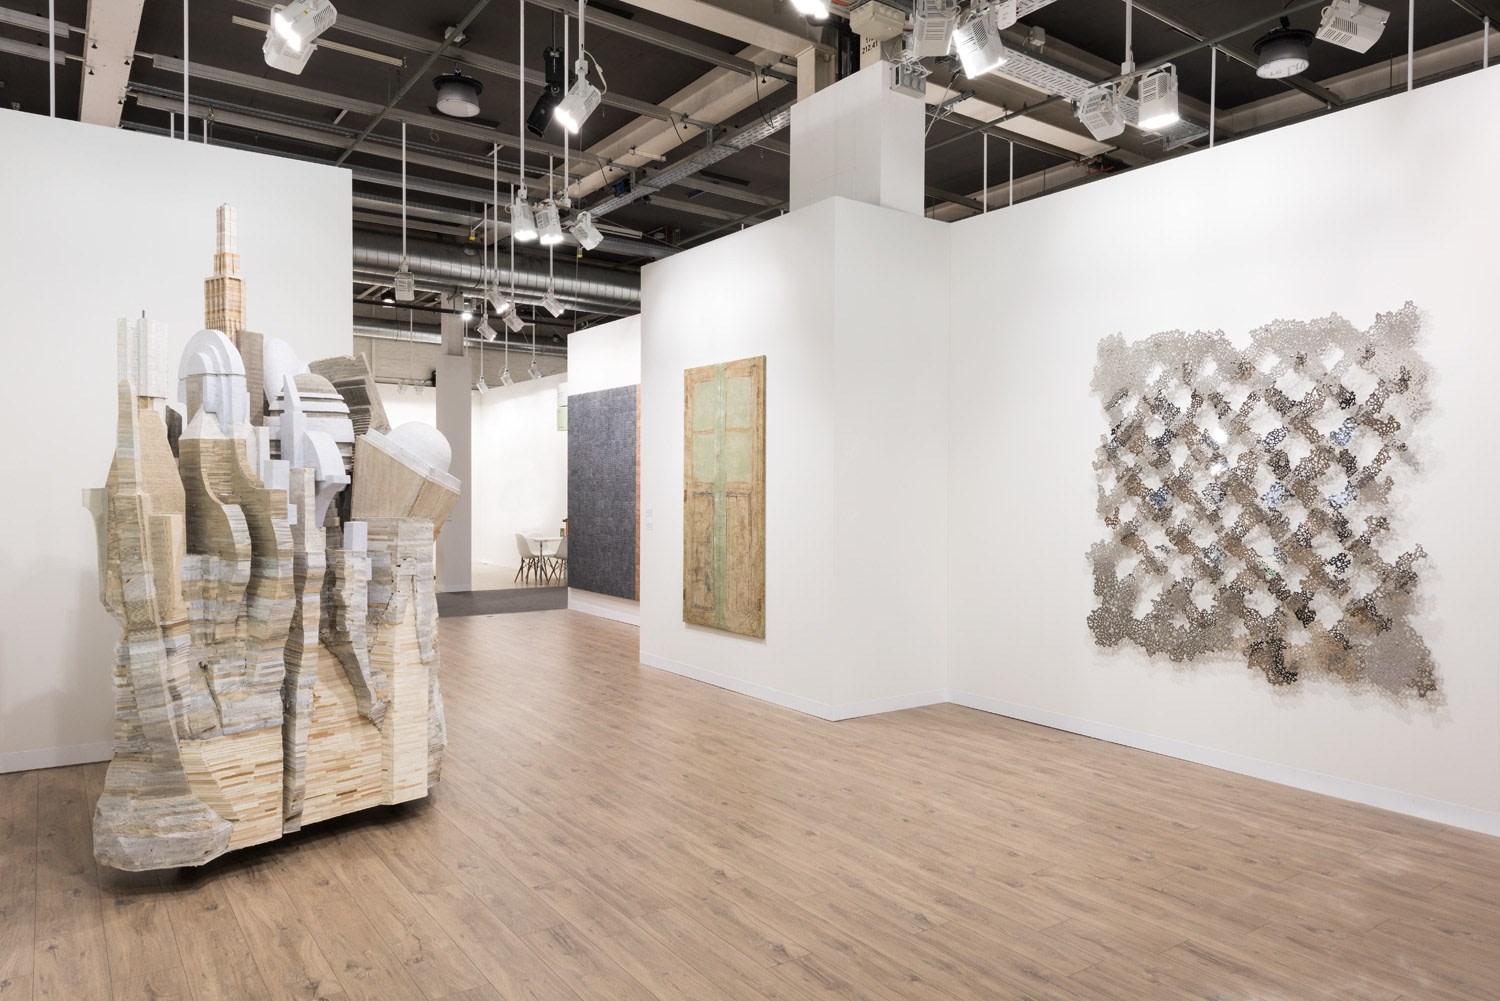 Installation view, Art Basel, June 14-17, 2018, Courtesy the artists and Lehmann Maupin, New York and Hong Kong, and Seoul.